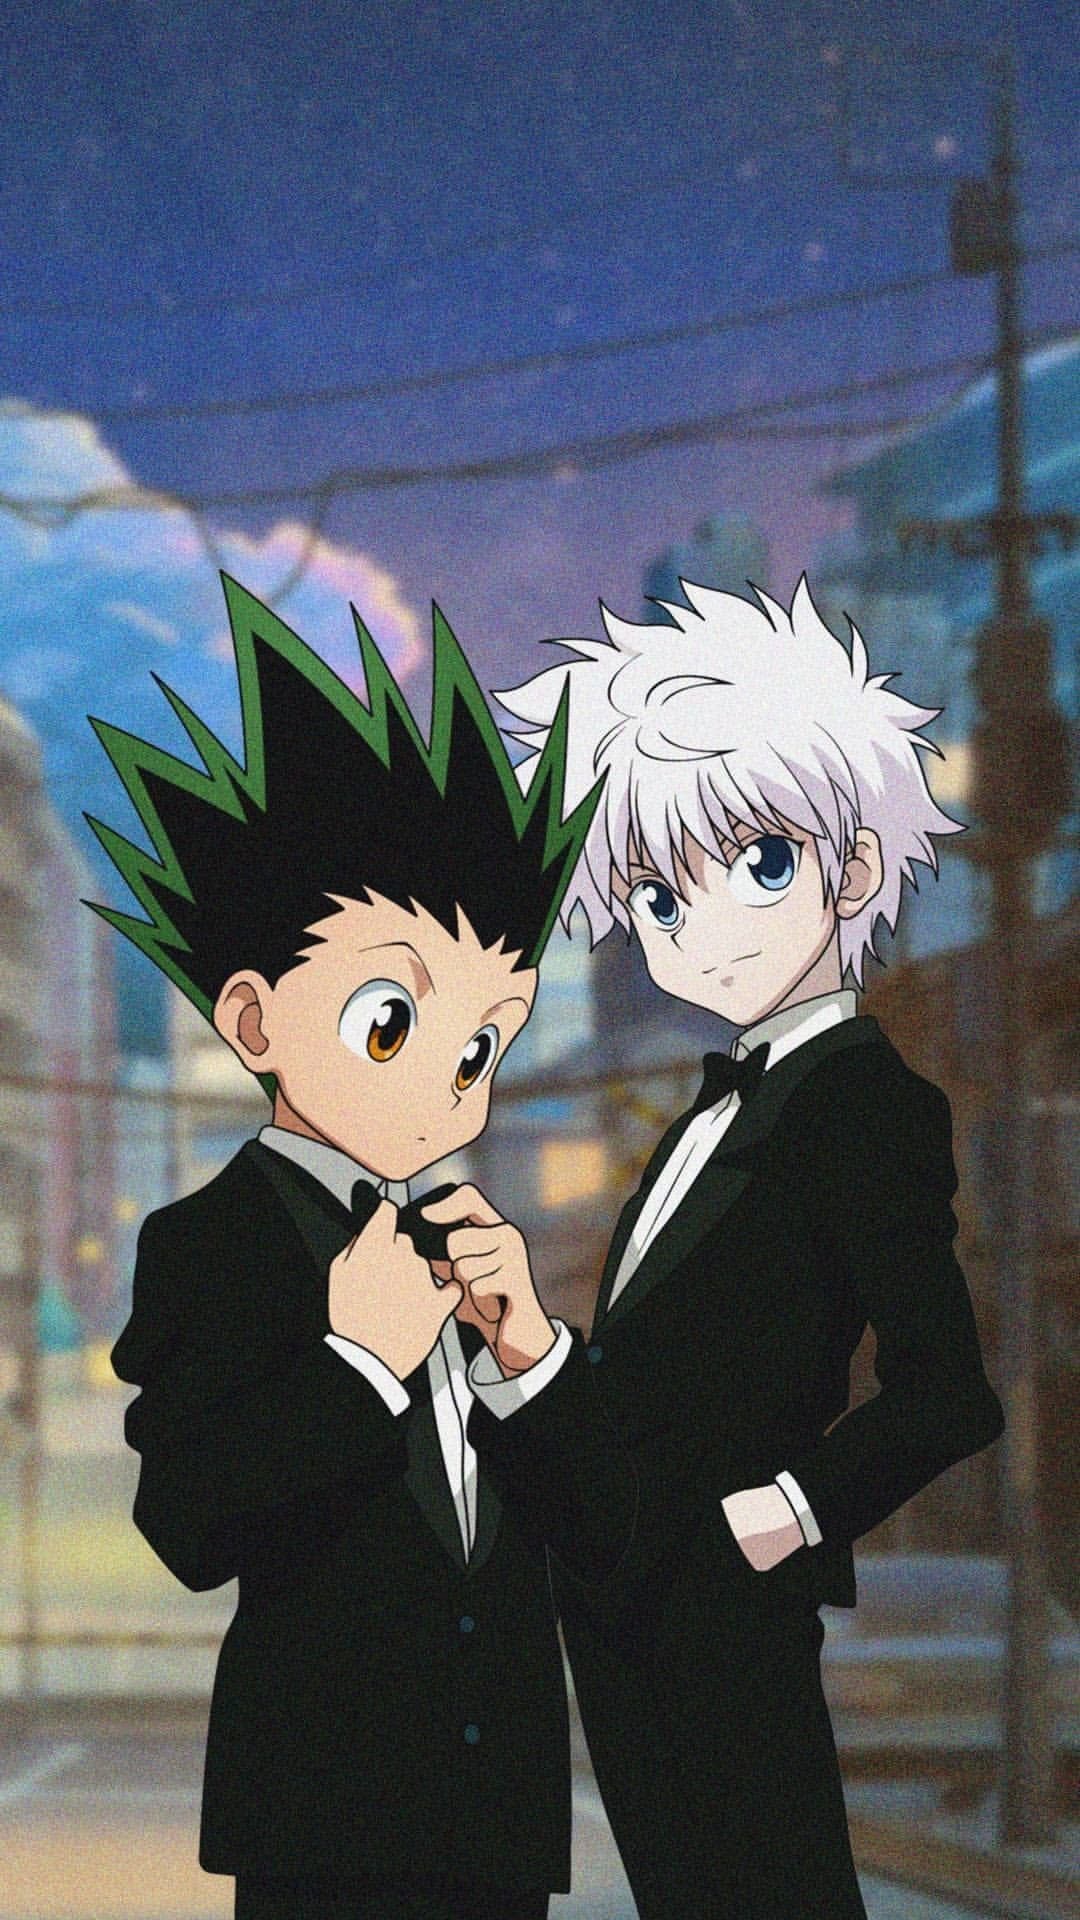 Gon and Killua: The tritagonist of the Hunter Exam arc and the Yorknew City arc, Best friends. 1080x1920 Full HD Background.